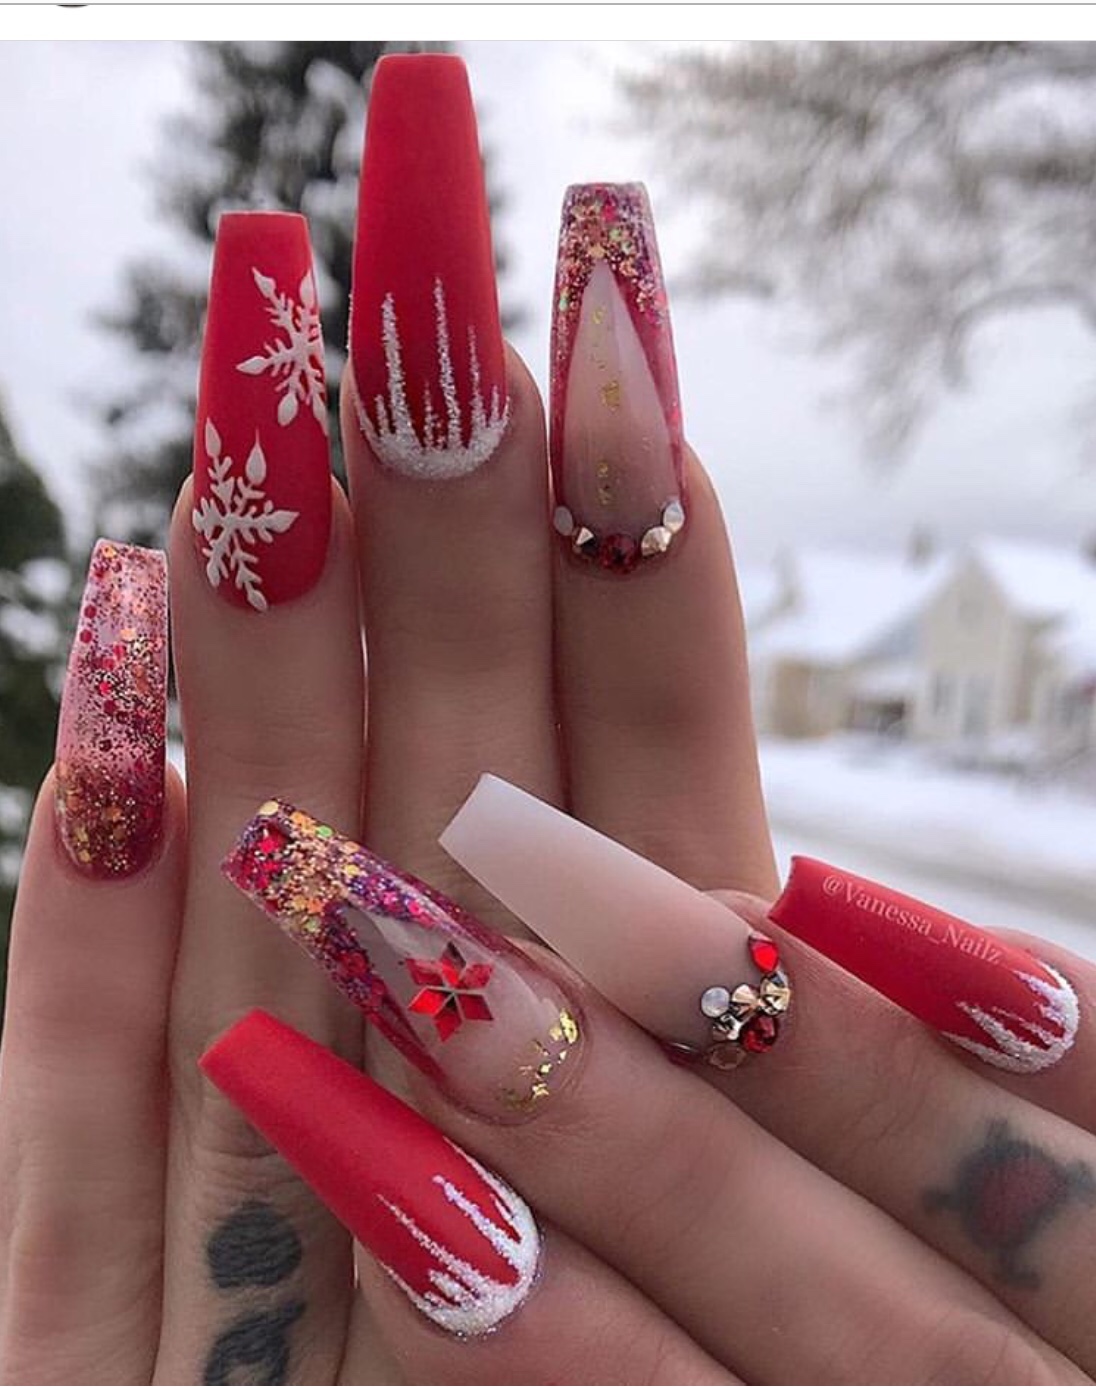 26 Simple Yet Chic Acrylic Nail Designs For Christmas 2019 - The Glossychic